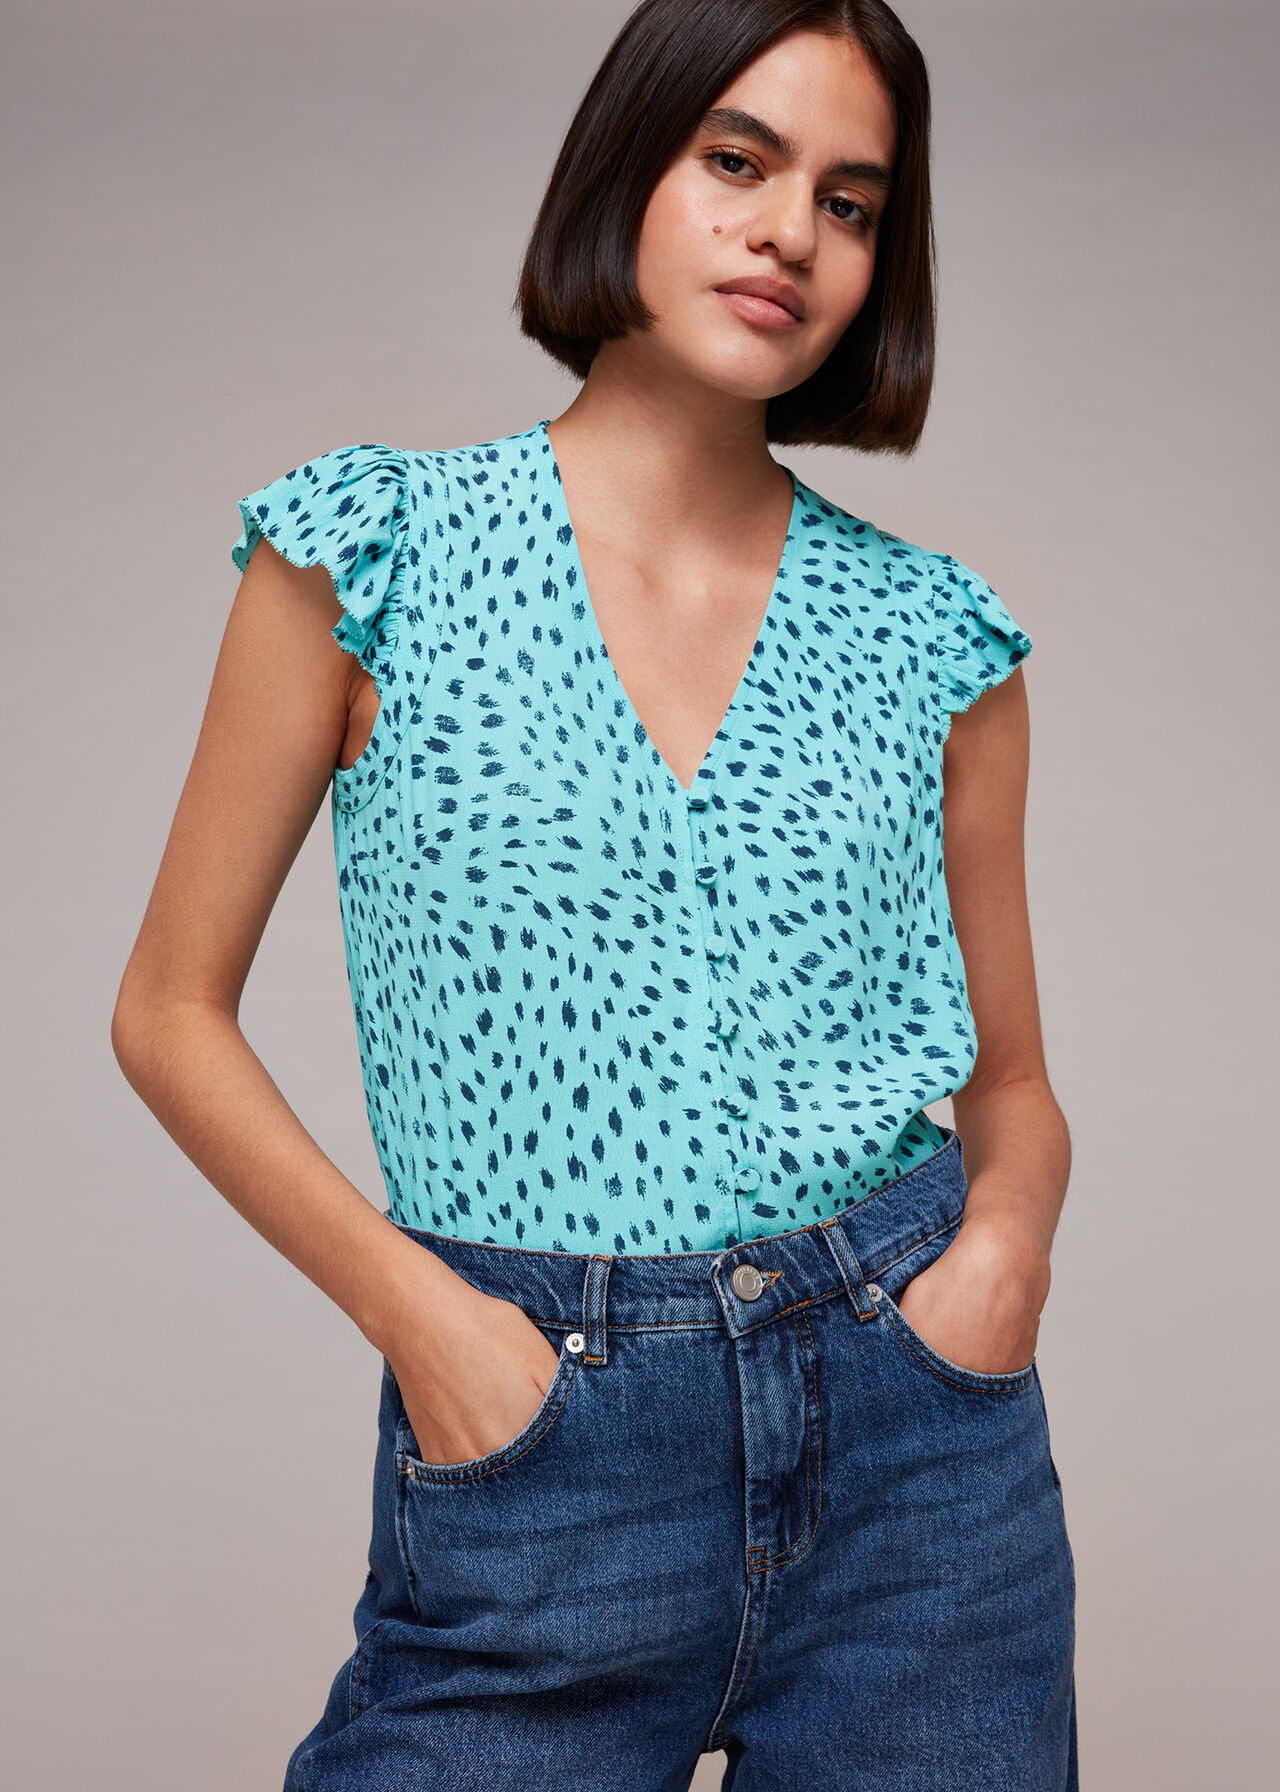 Speckled Spot Frill Top